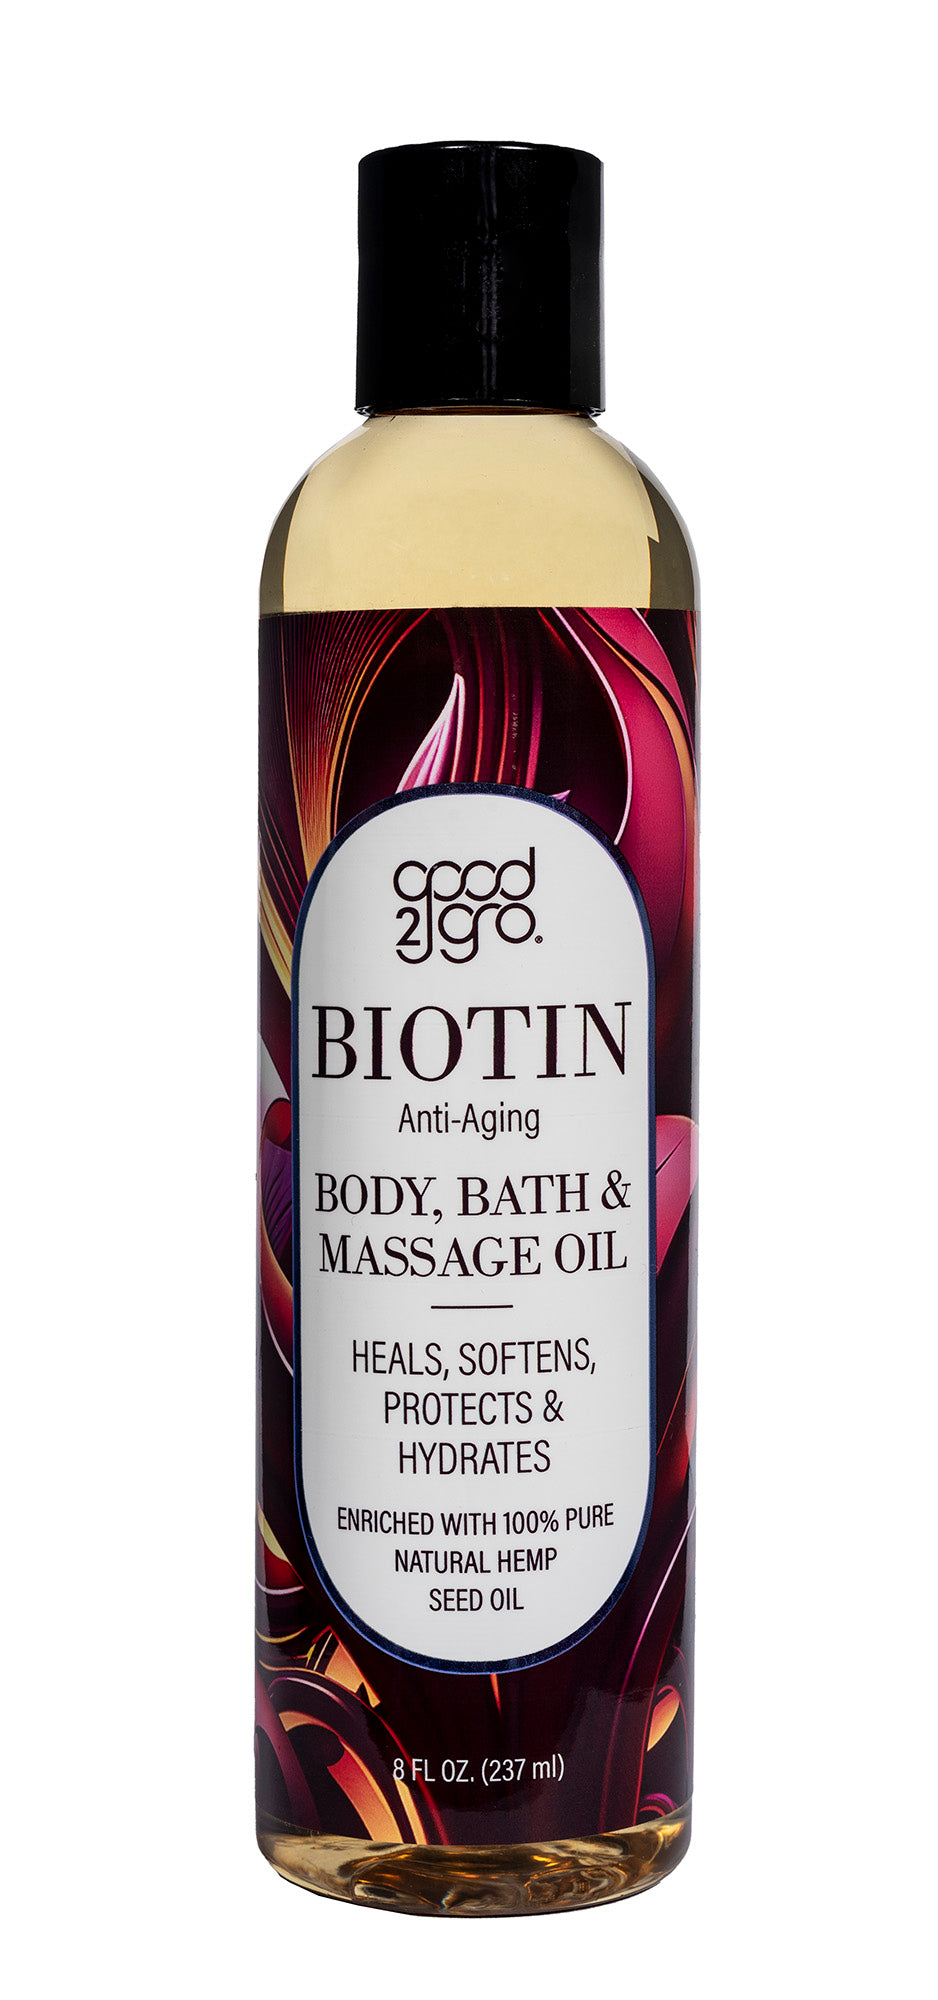 GOOD2GRO Biotin Anti-Aging Body, Bath & Massage Oil, Helps Skin Regain Suppleness, Softens, Smoothes, Improves Elasticity, Crepey Skin, Stretch Marks and Evens Skin Tone 8oz.